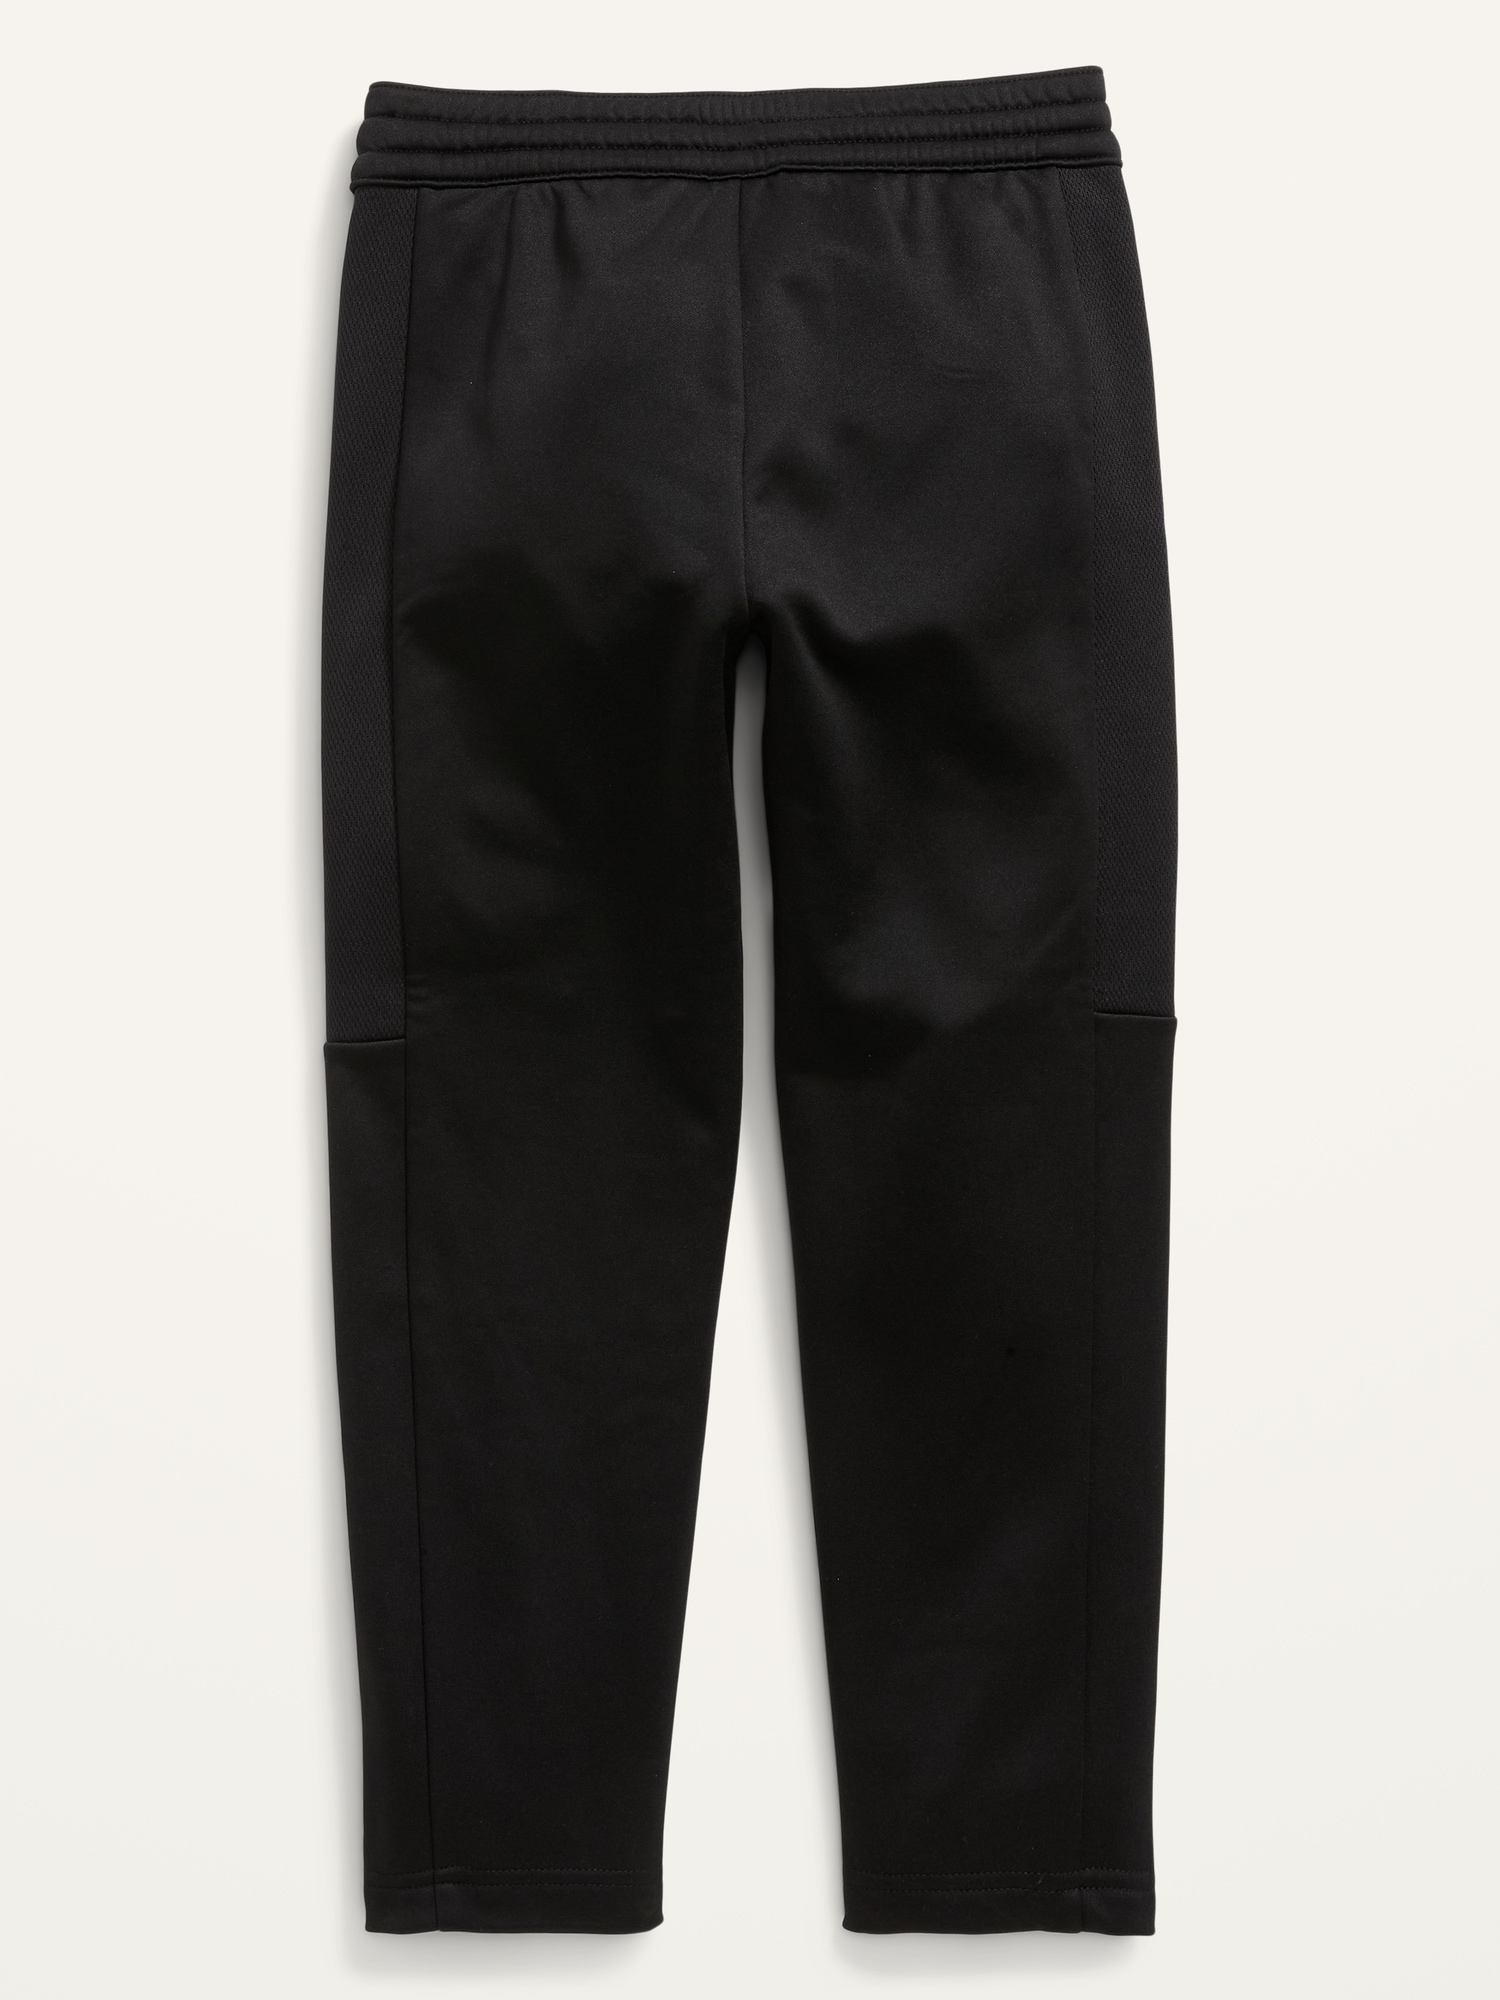 Techie Fleece Tapered Sweatpants for Boys